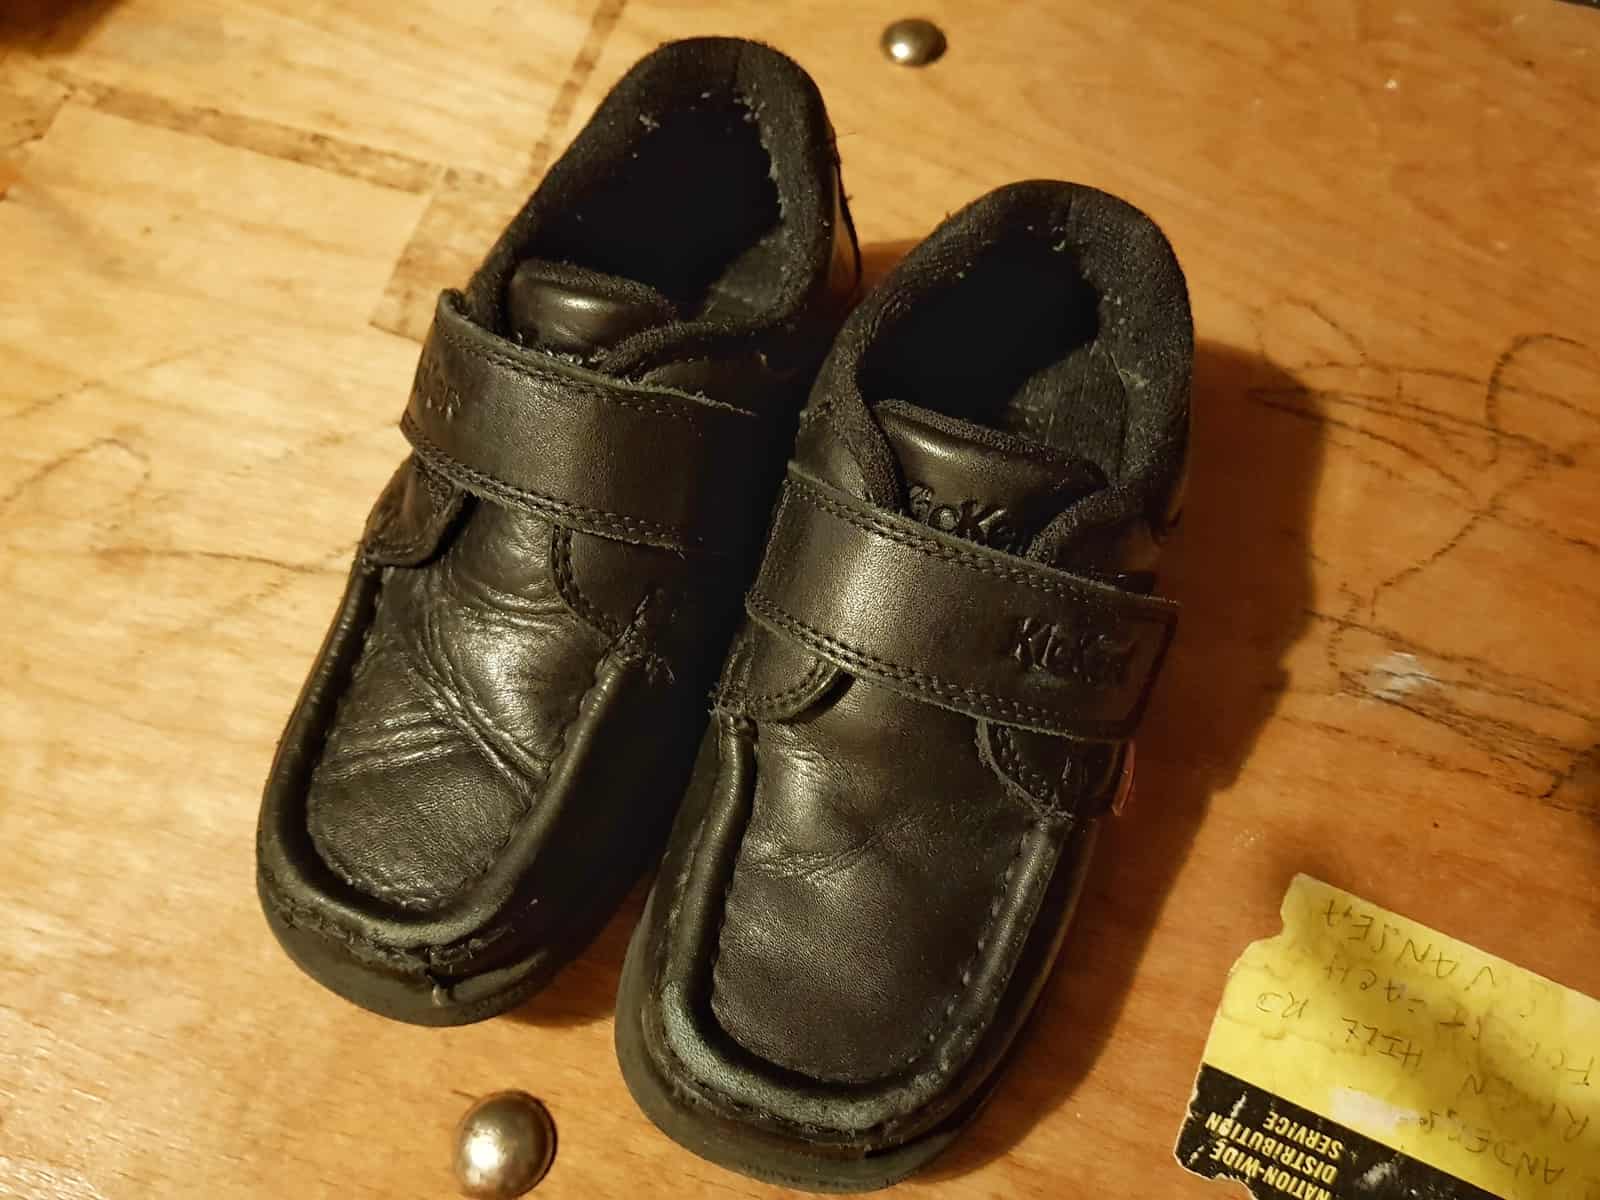 Black boys loafers school shoes on a wooden surface